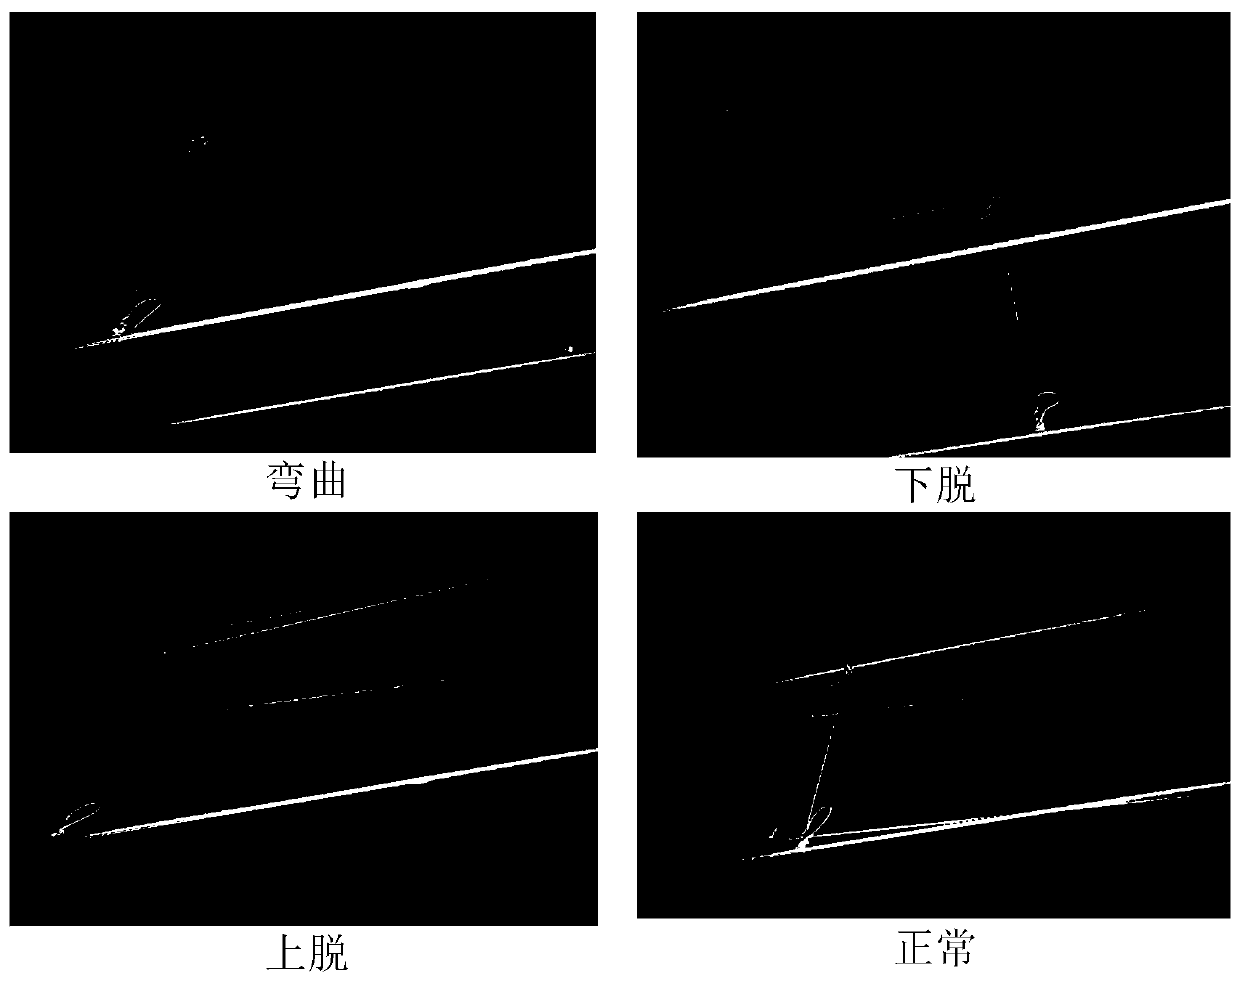 High-speed rail overhead line system stay wire defect detection method based on deep learning